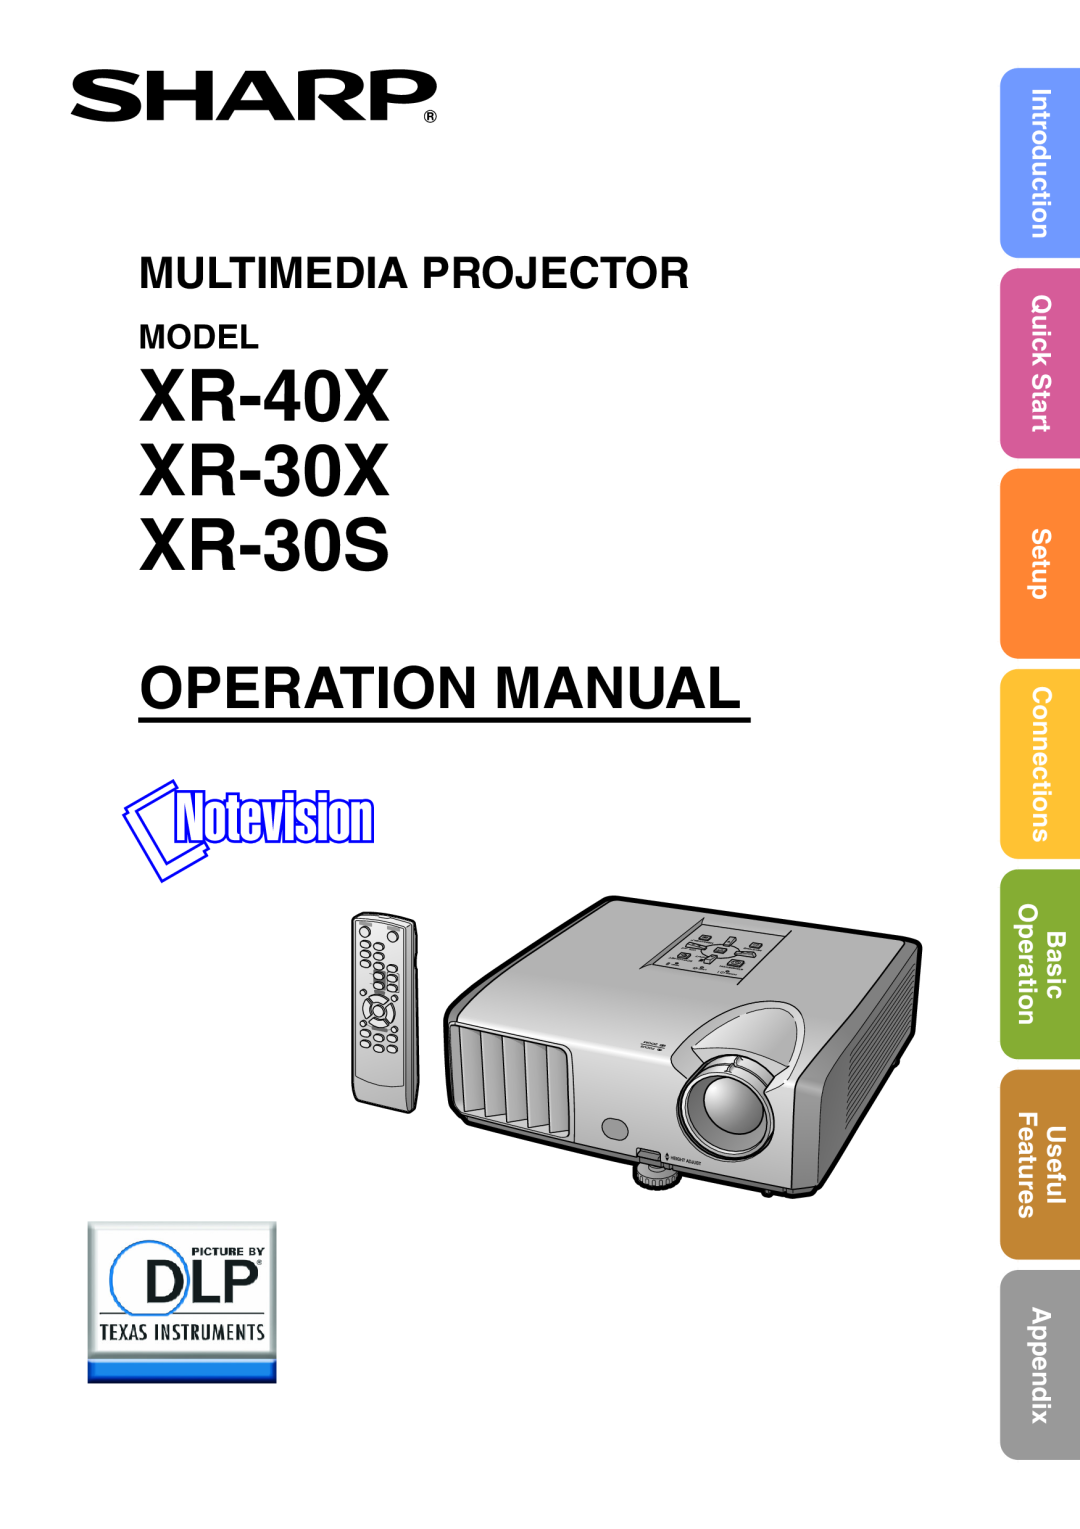 Sharp operation manual Model, XR-40X XR-30X XR-30S, Operation Manual, Multimedia Projector, Setup, Basic, Features 